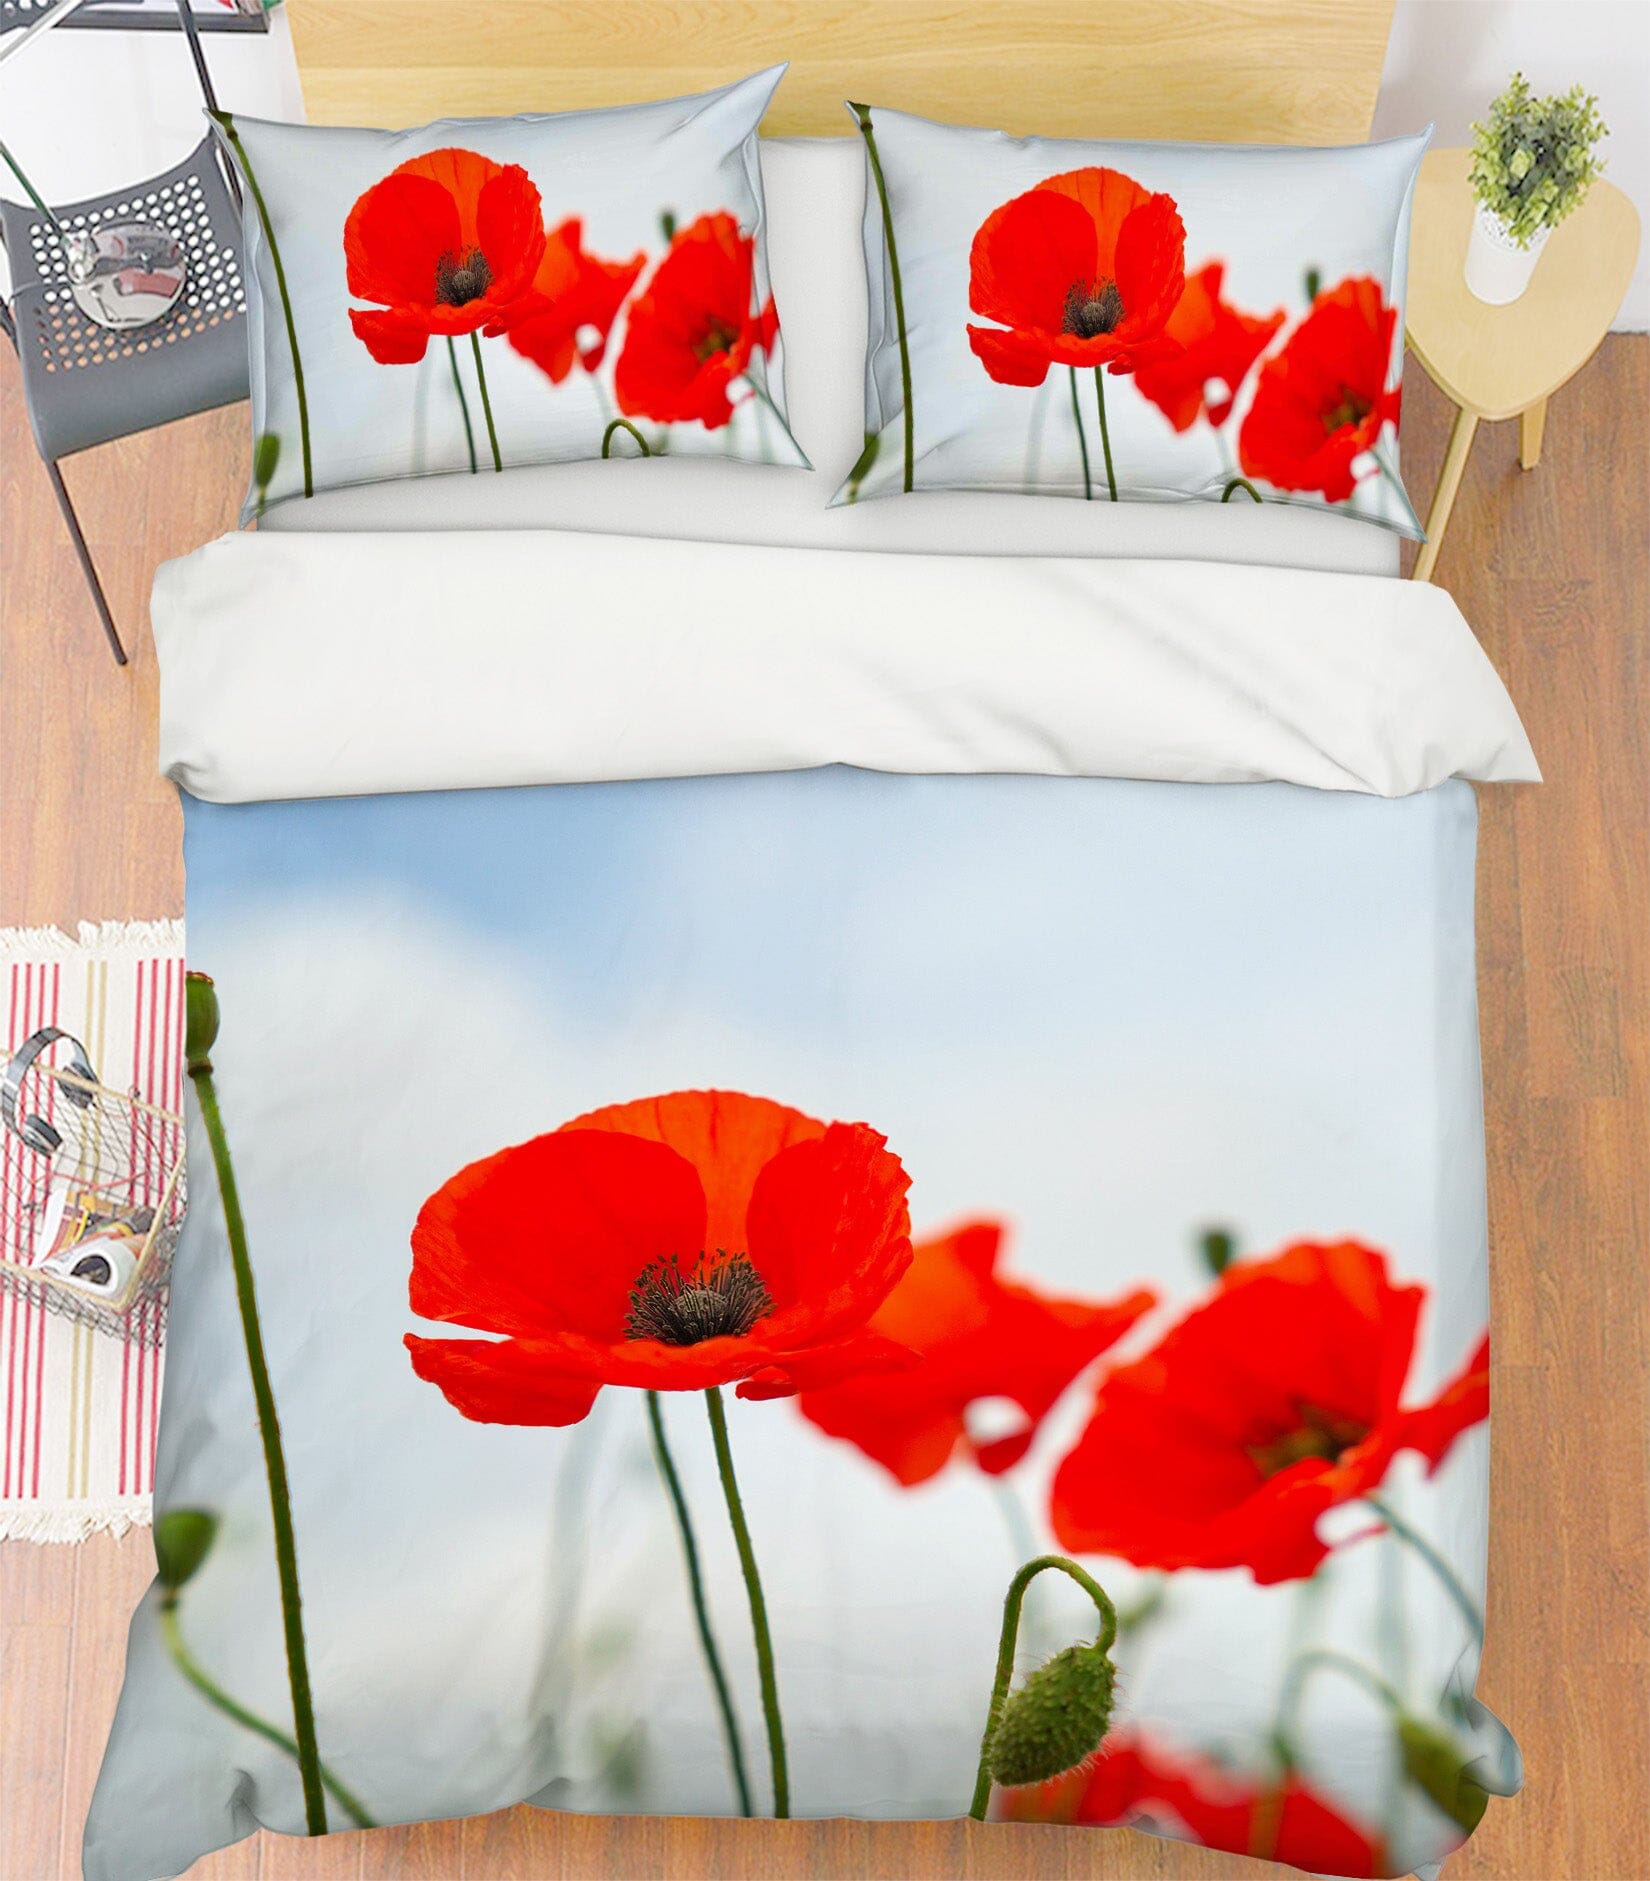 3D Red Flowers 2112 Marco Carmassi Bedding Bed Pillowcases Quilt Quiet Covers AJ Creativity Home 